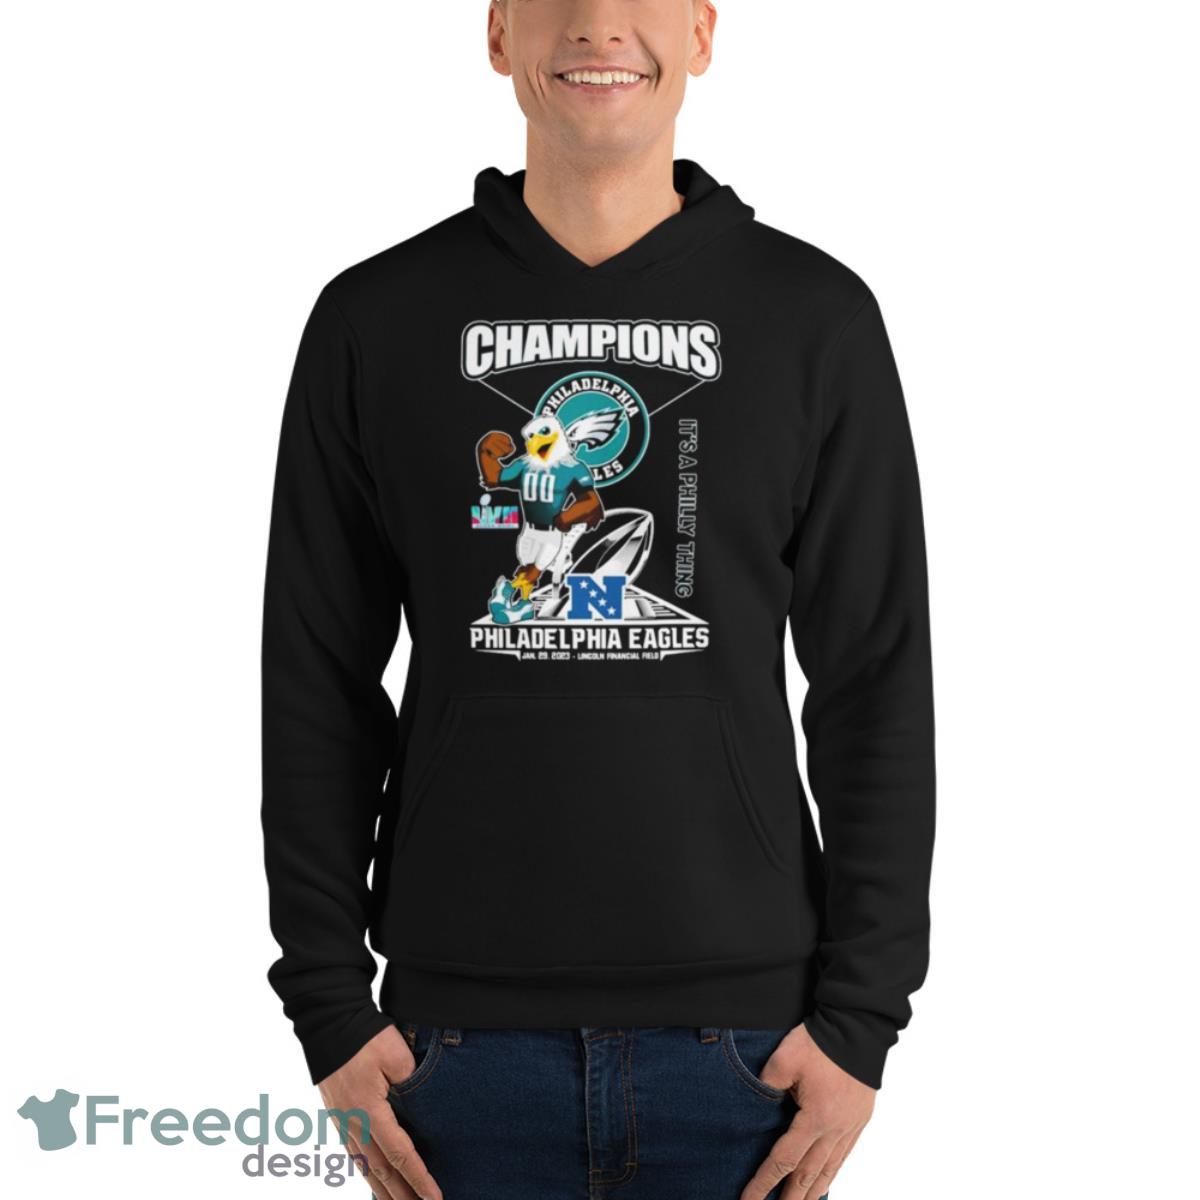 This Is My Eagles Win The Super Bowl Shirt, Funny Eagles Shirt, Philadelphia  Eagles Gift Idea - Philadelphia Eagles Super Bowl - Long Sleeve T-Shirt